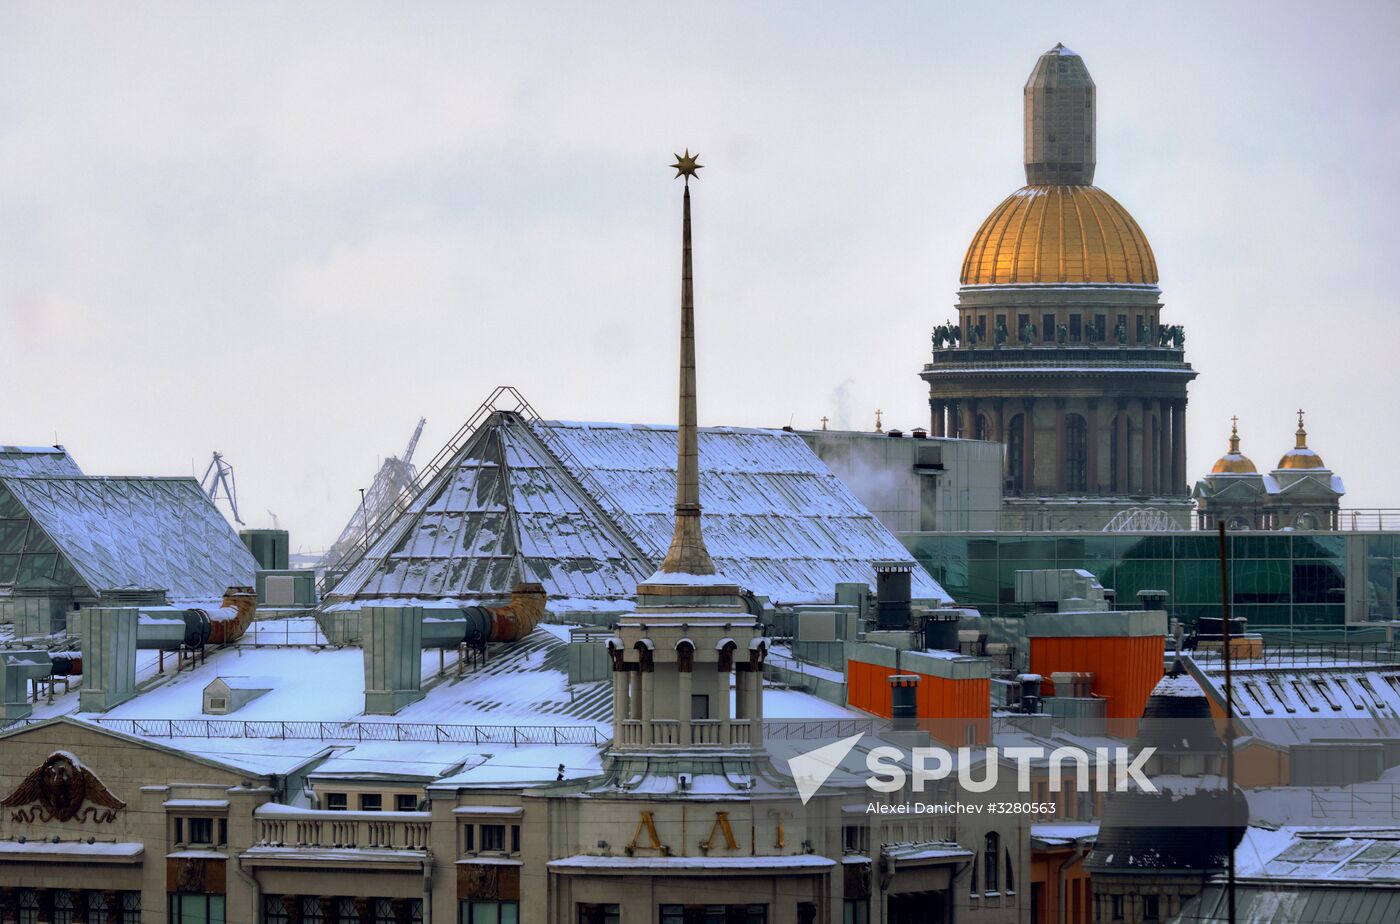 Restauration of Church of the Savior on Blood in St. Petersburg